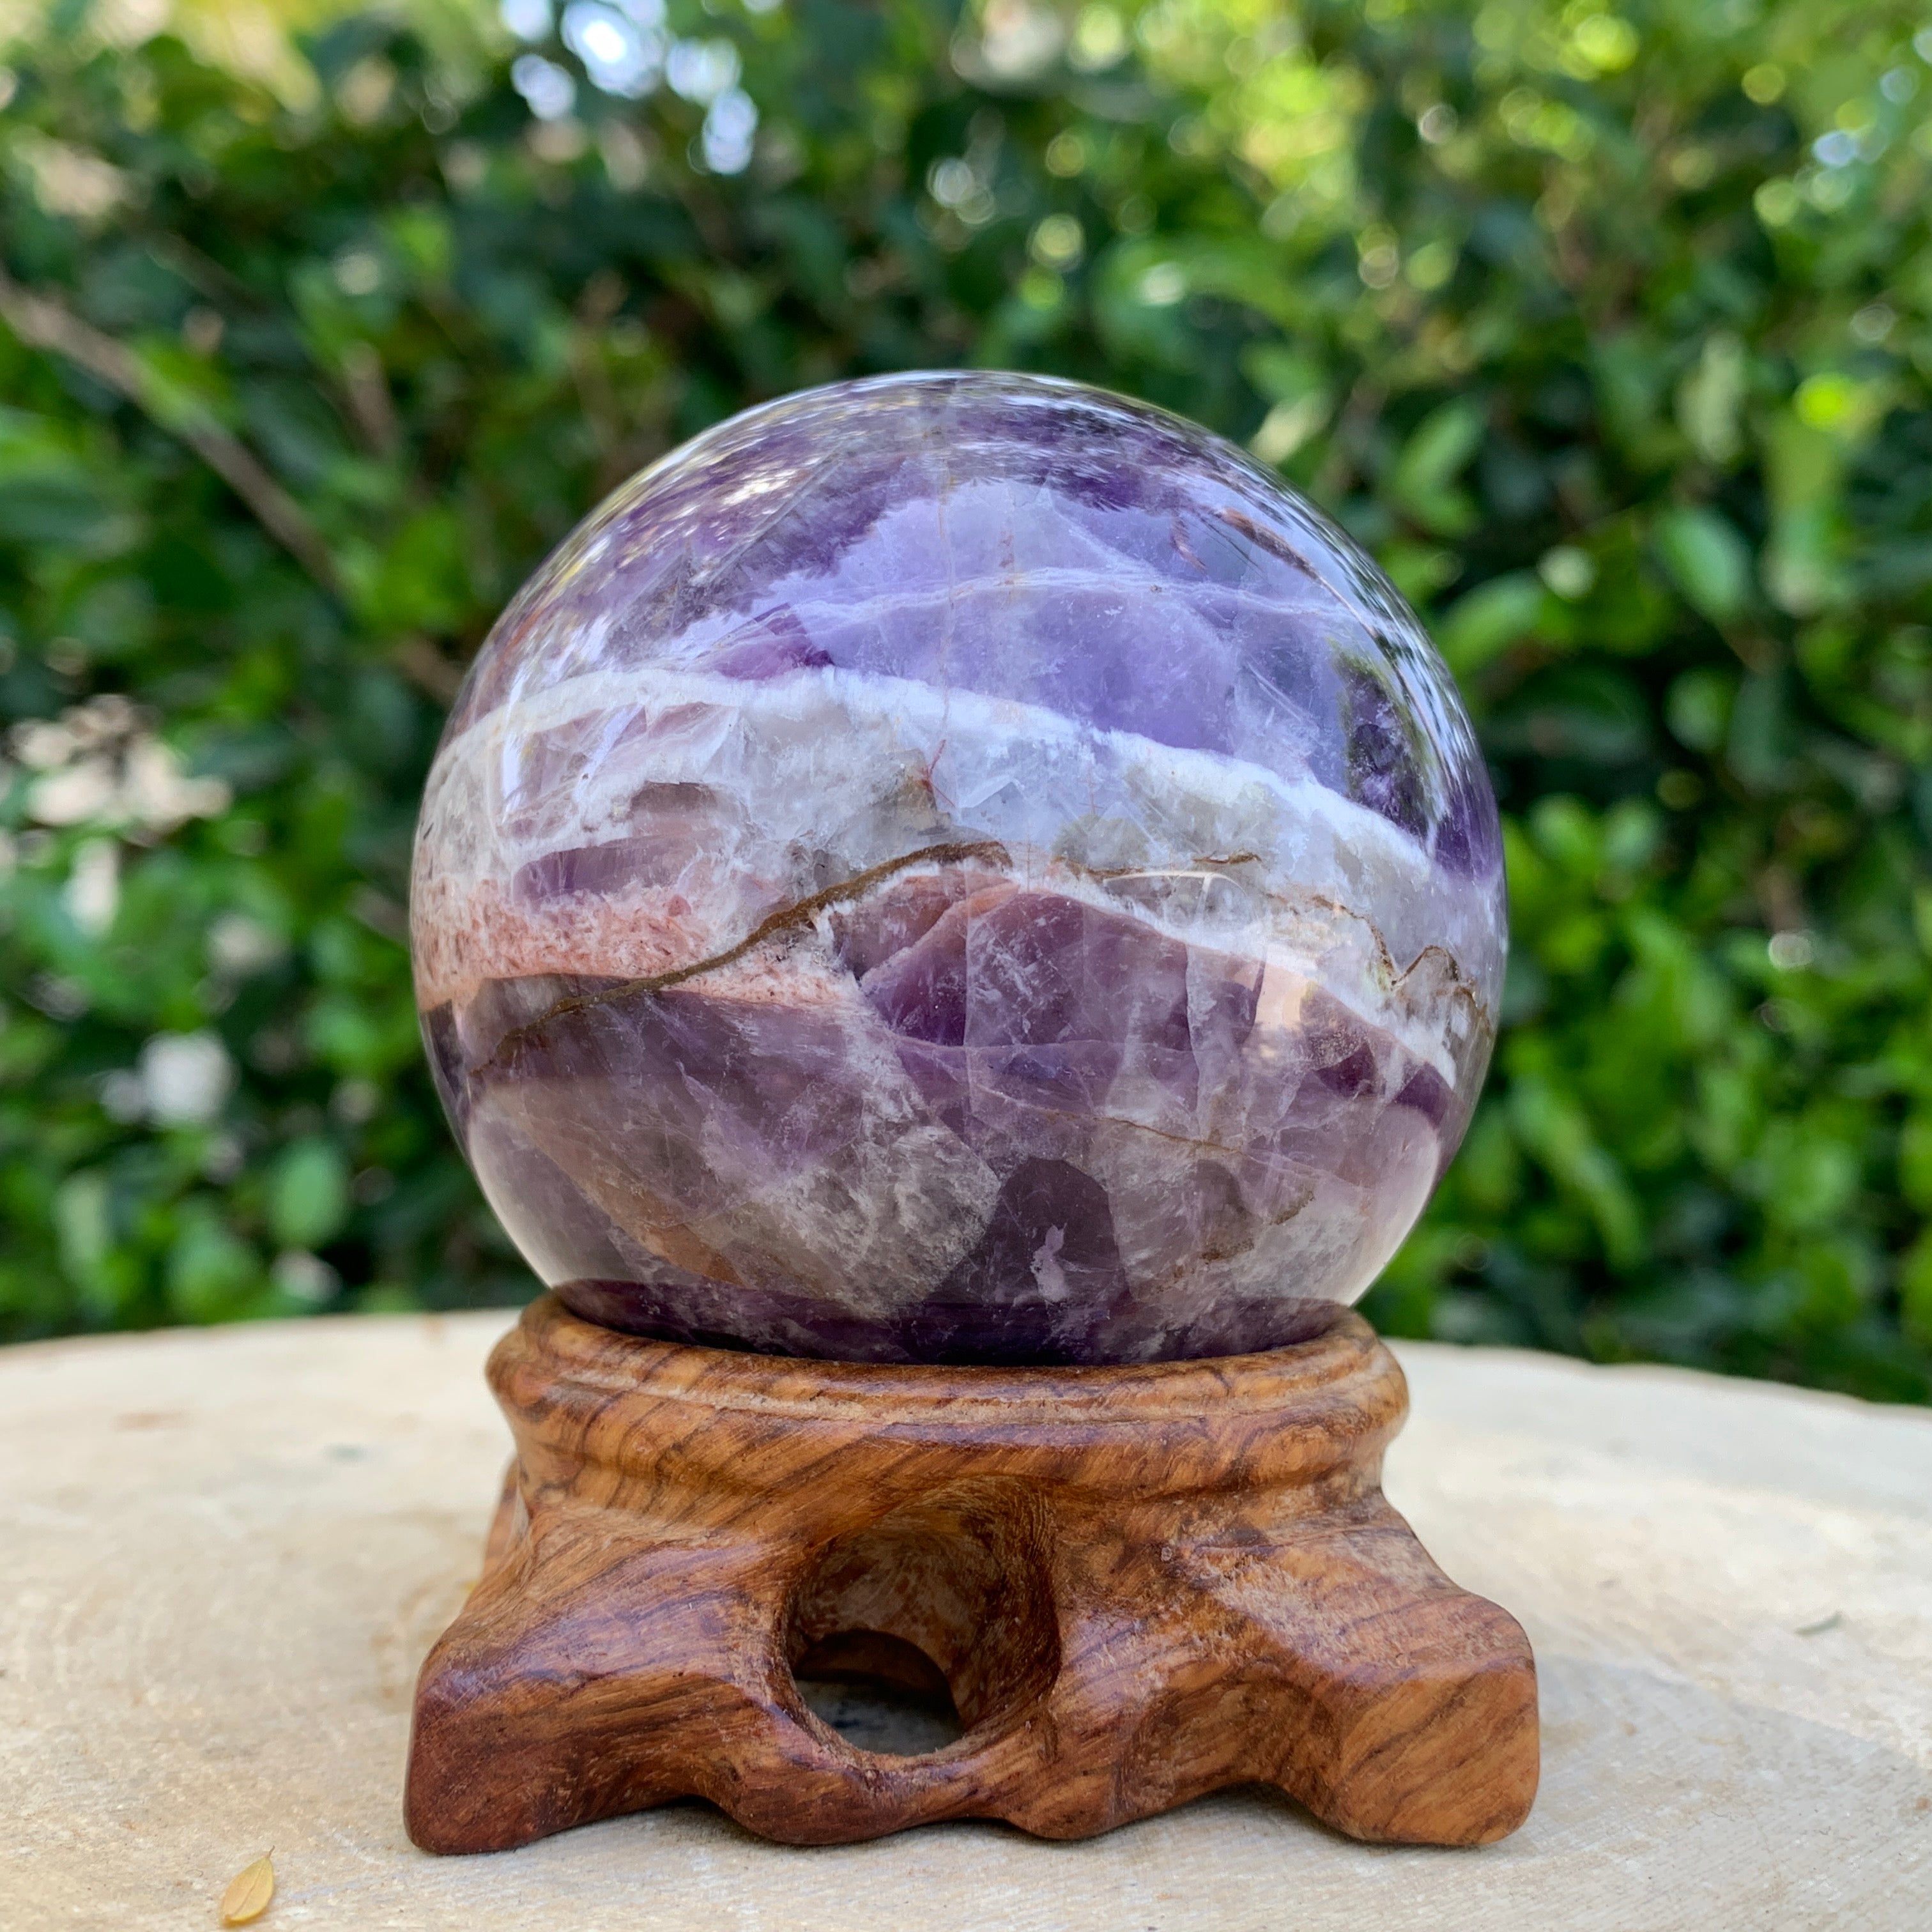 450g 6x6x6cm Purple Banded Chevron Amethyst Sphere from South Africa